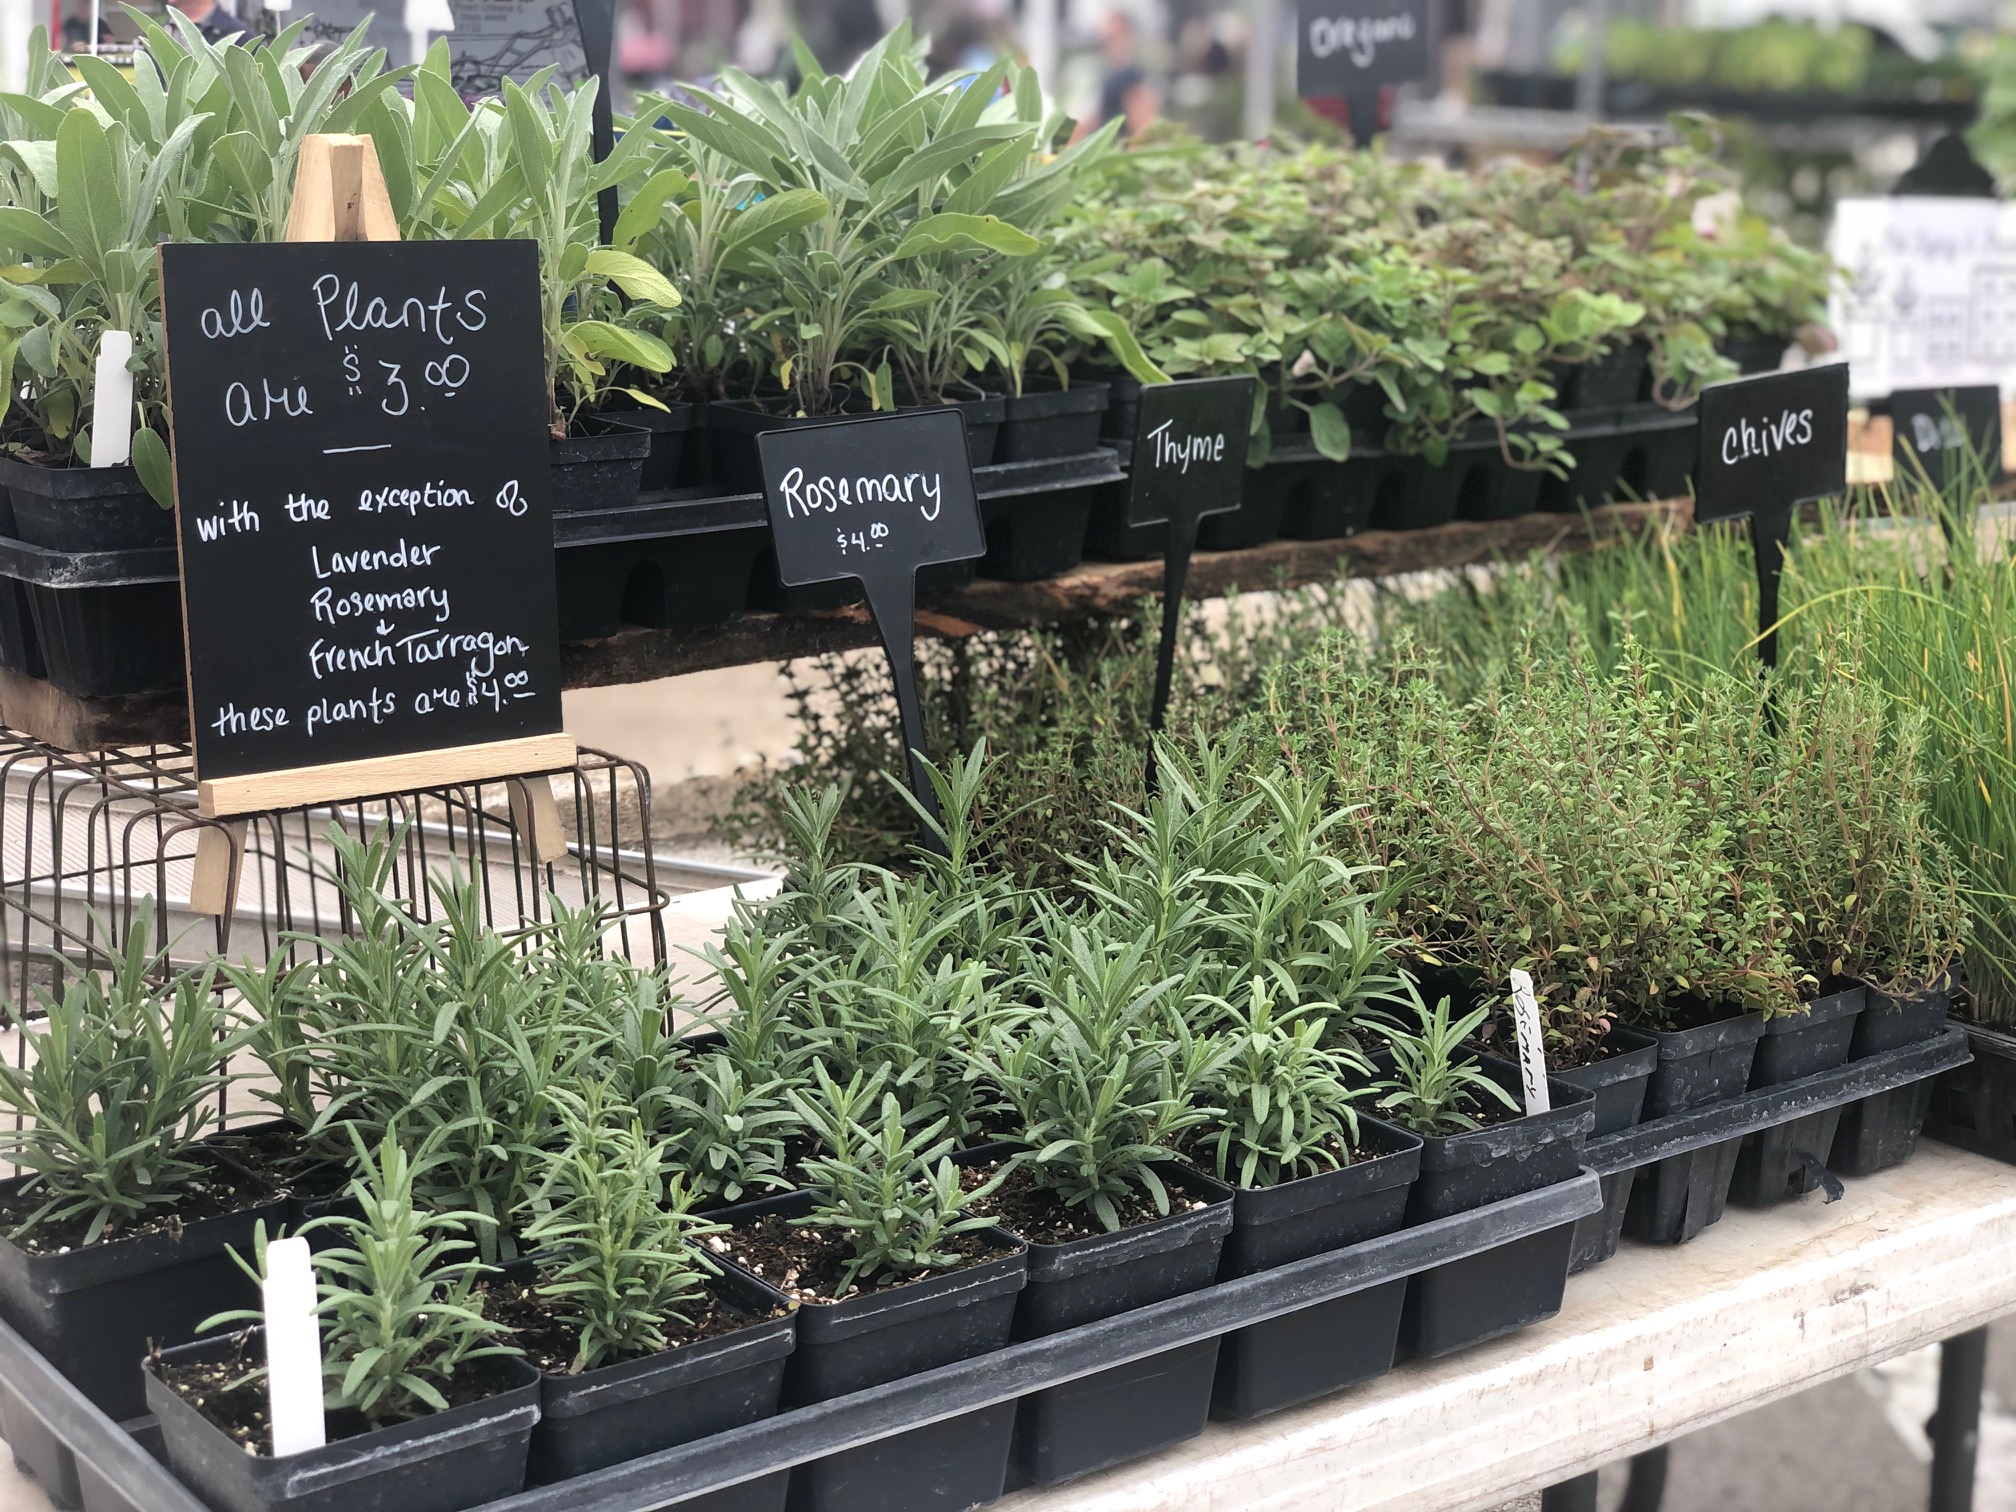 On a folding table, there are plantable herbs in small black containers arranged inside a large gray tray. The sign says the herbs are all $3 unless lavendar, rosemary, or fresh tarragon.  Photo by Alyssa Buckley.